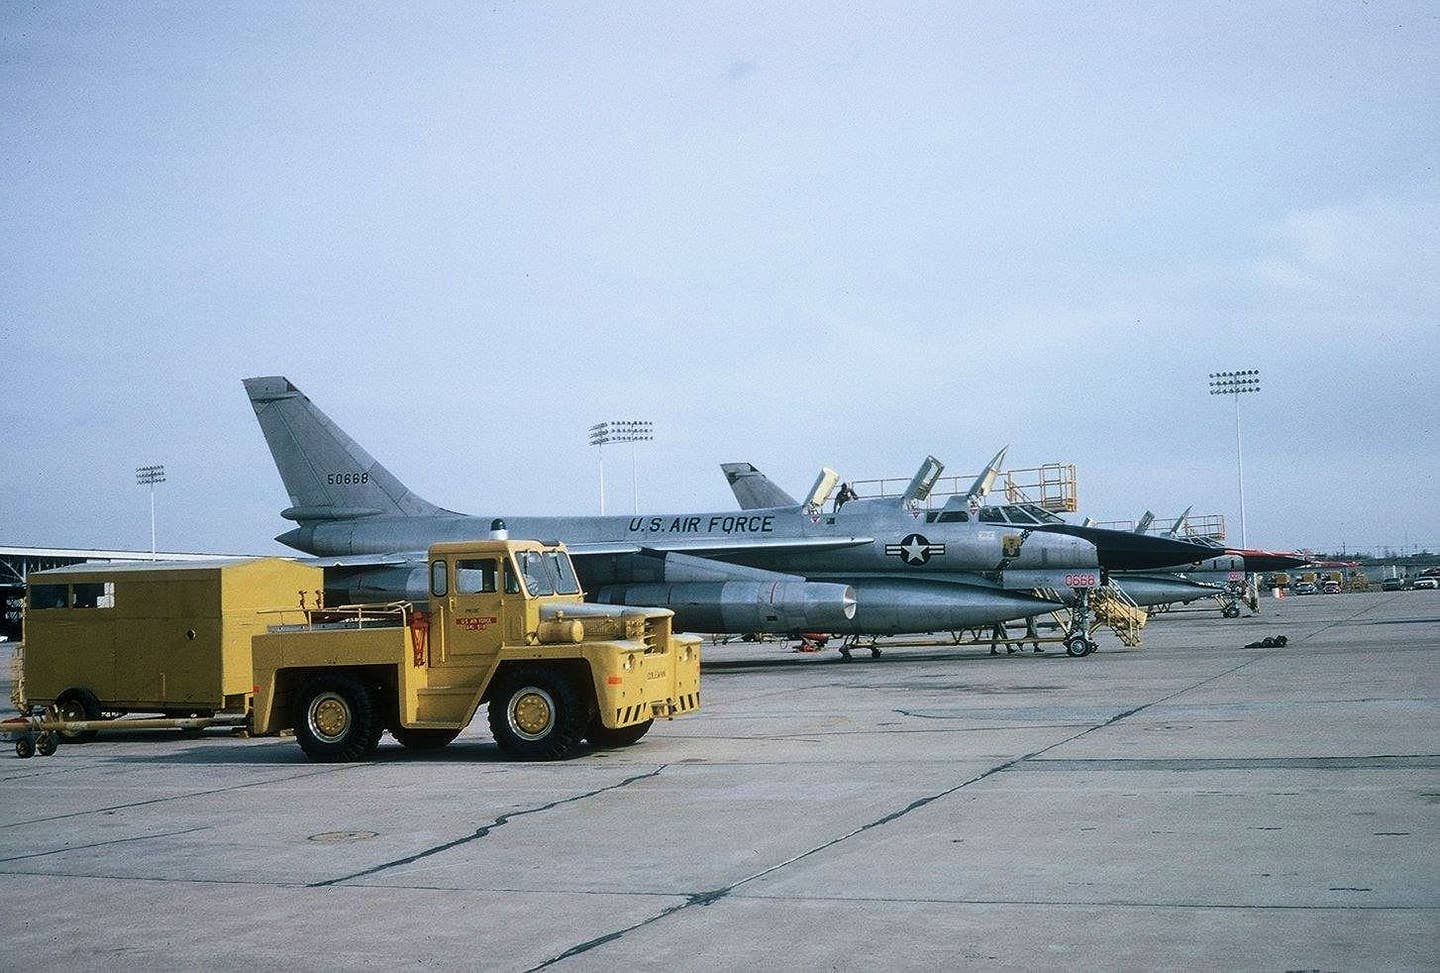 Pictured later in its career, after conversion to become a TB-58A trainer, this is 55-0668 <em>Peeping Tom</em>, the testbed for Project Quick Check. <em>U.S. Air Force</em>